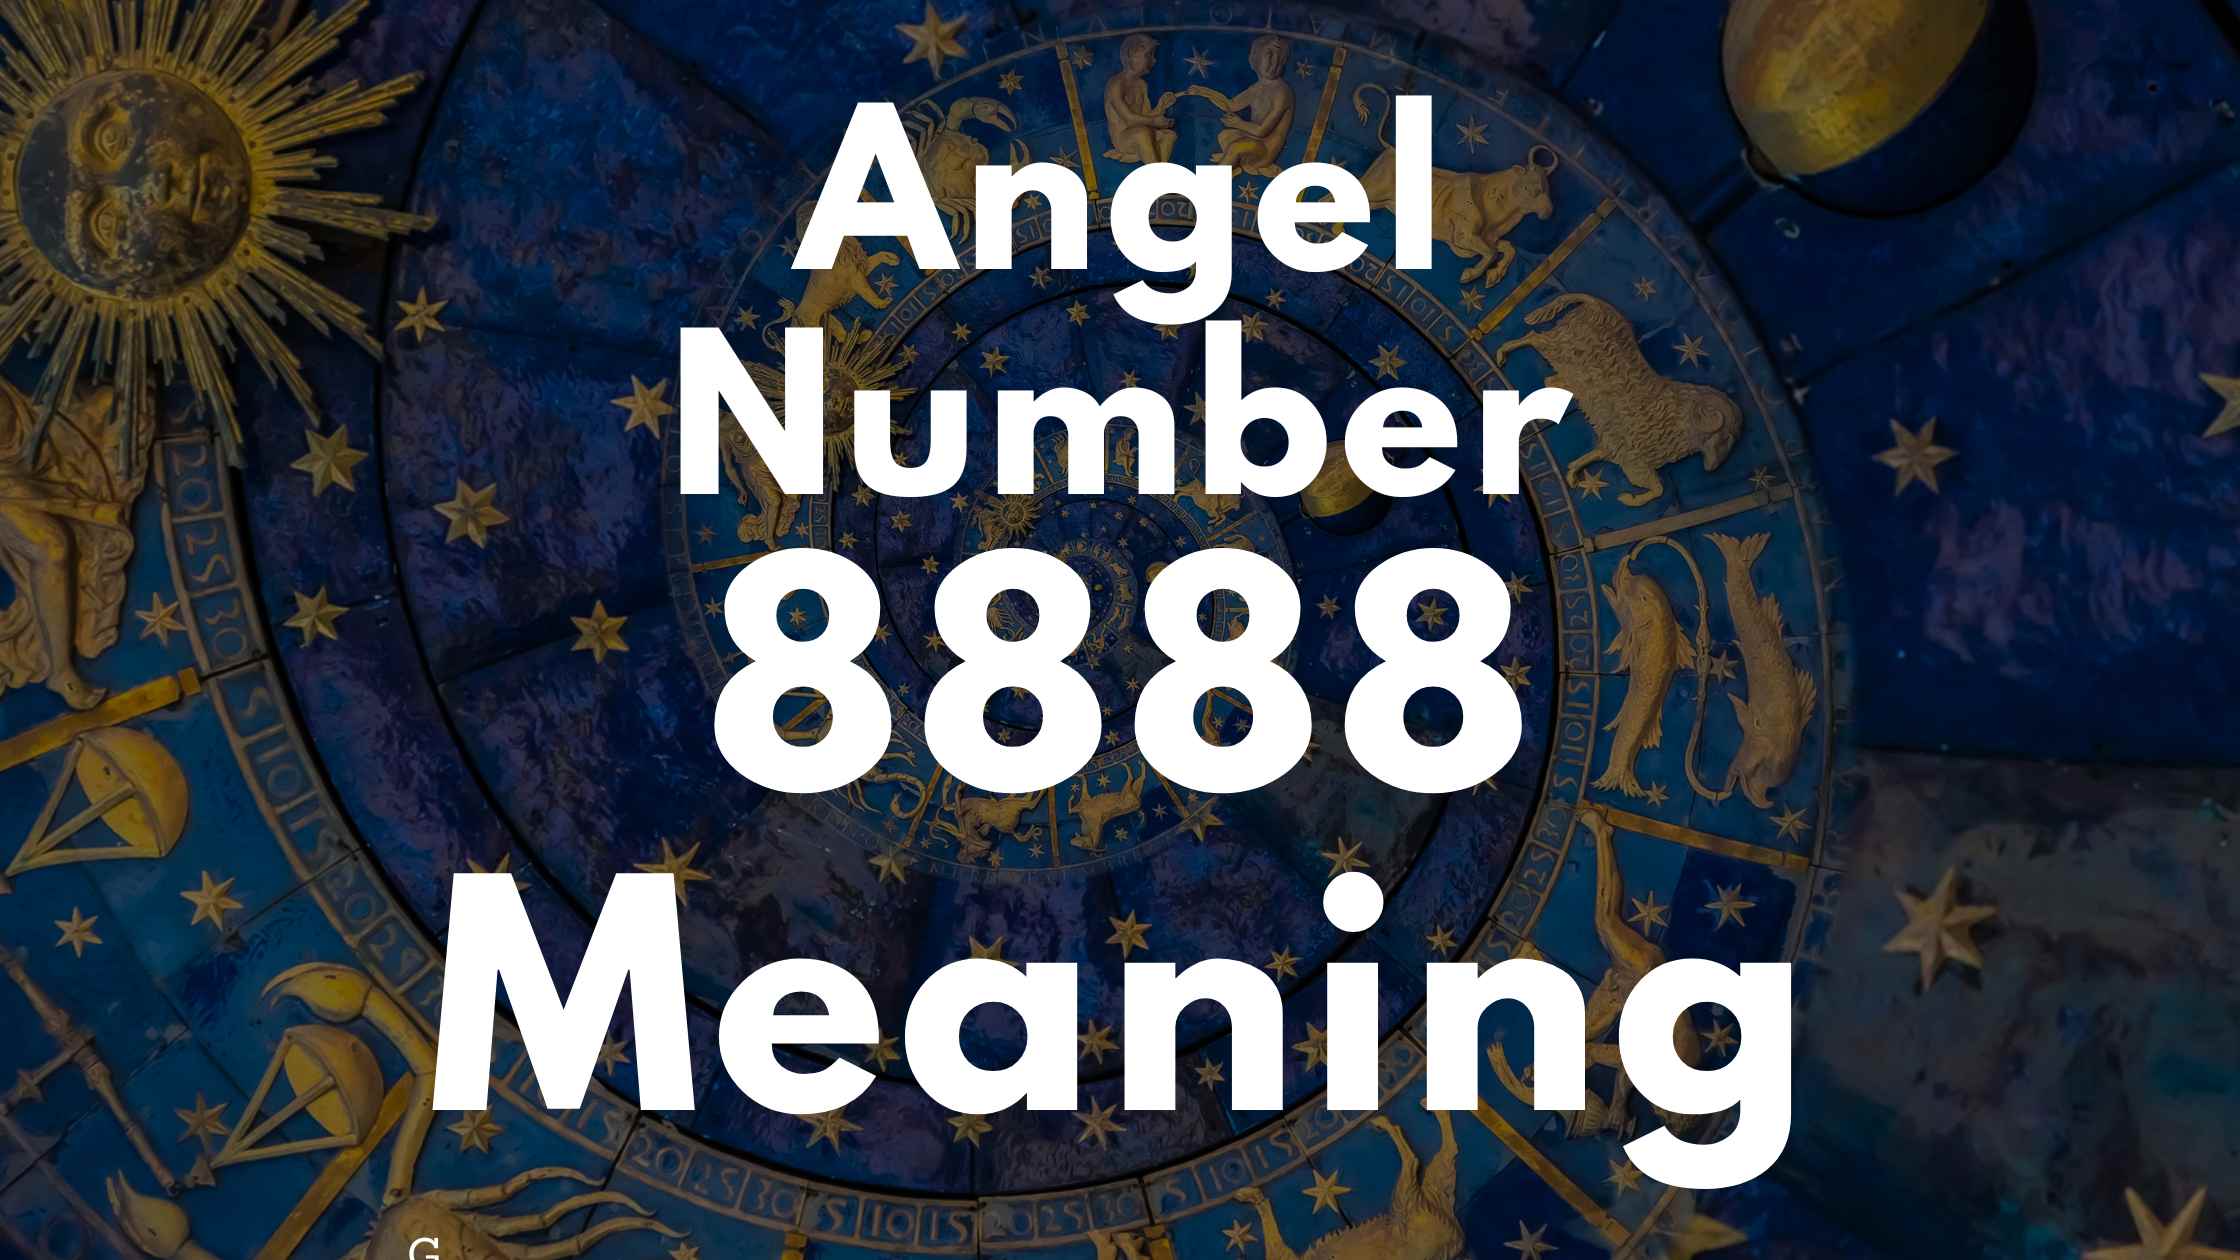 Angel Number 8888 Spiritual Meaning, Symbolism, and Significance